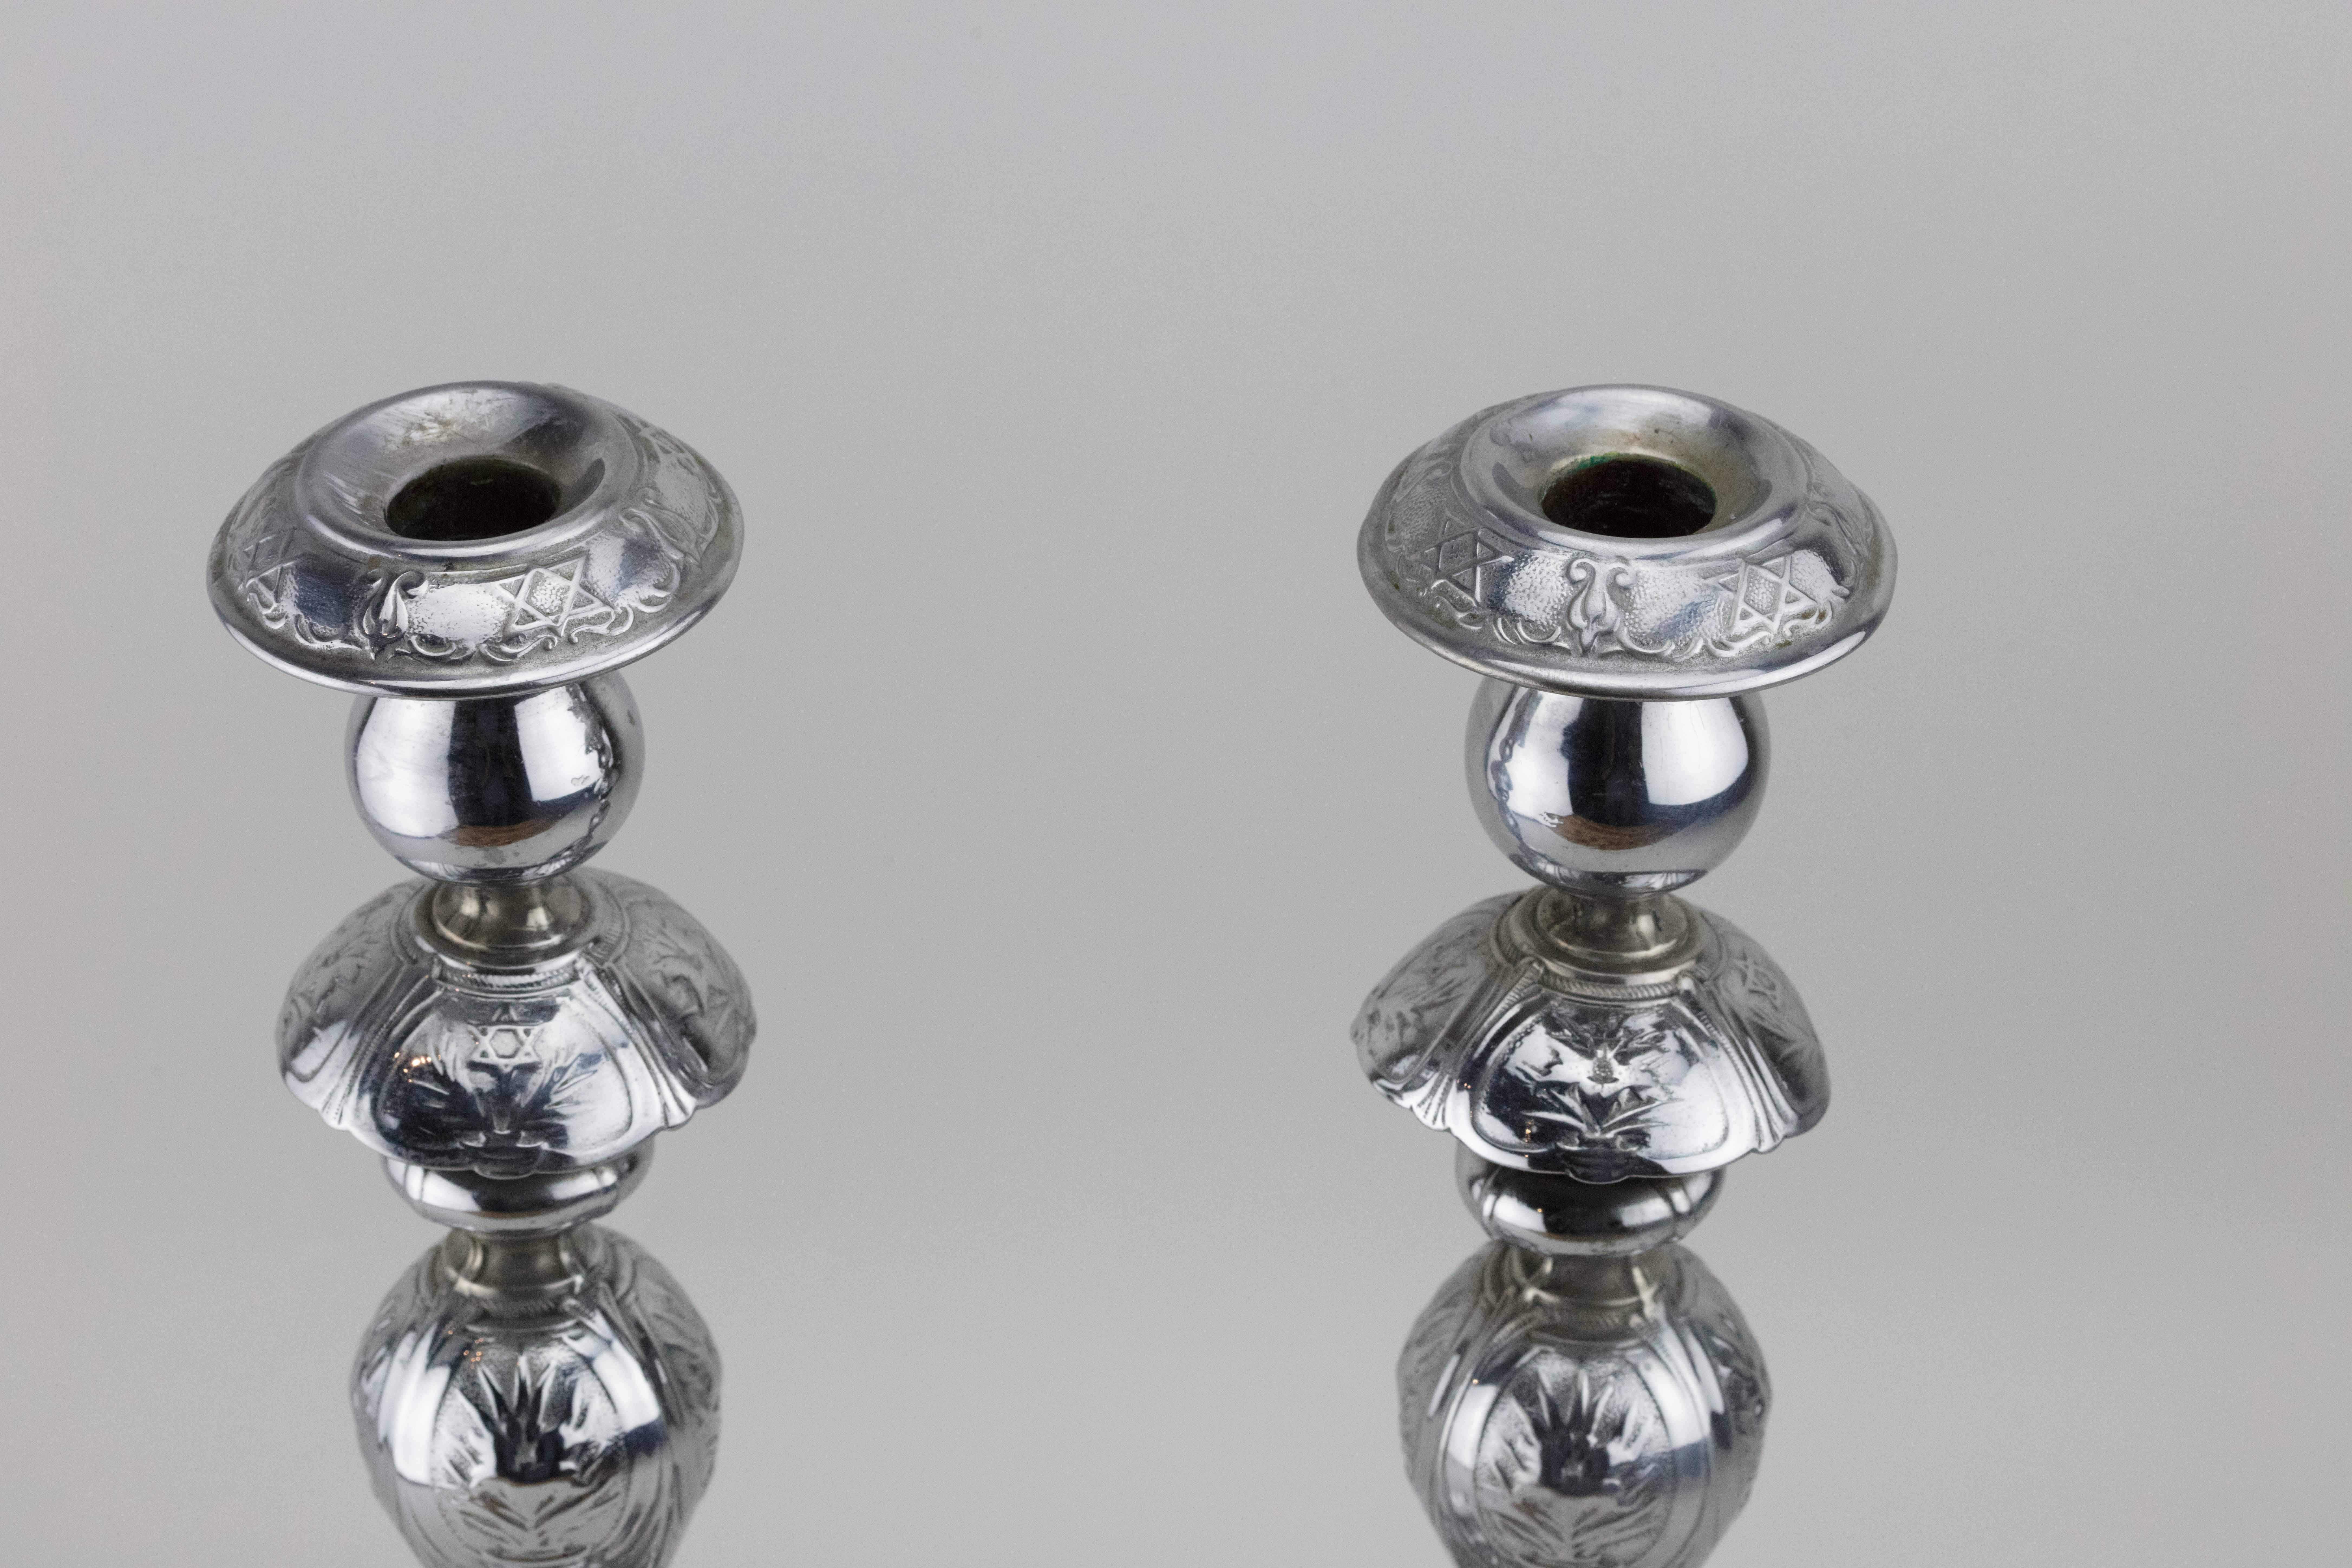 Rare pair of silver-plated brass Shabbat candlesticks, Warsaw, Poland, 1908.
These matching Shabbat candlesticks, impressed with flowers and Star of David, are the result of assembly-line production that was abundant in Warsaw during the end of the